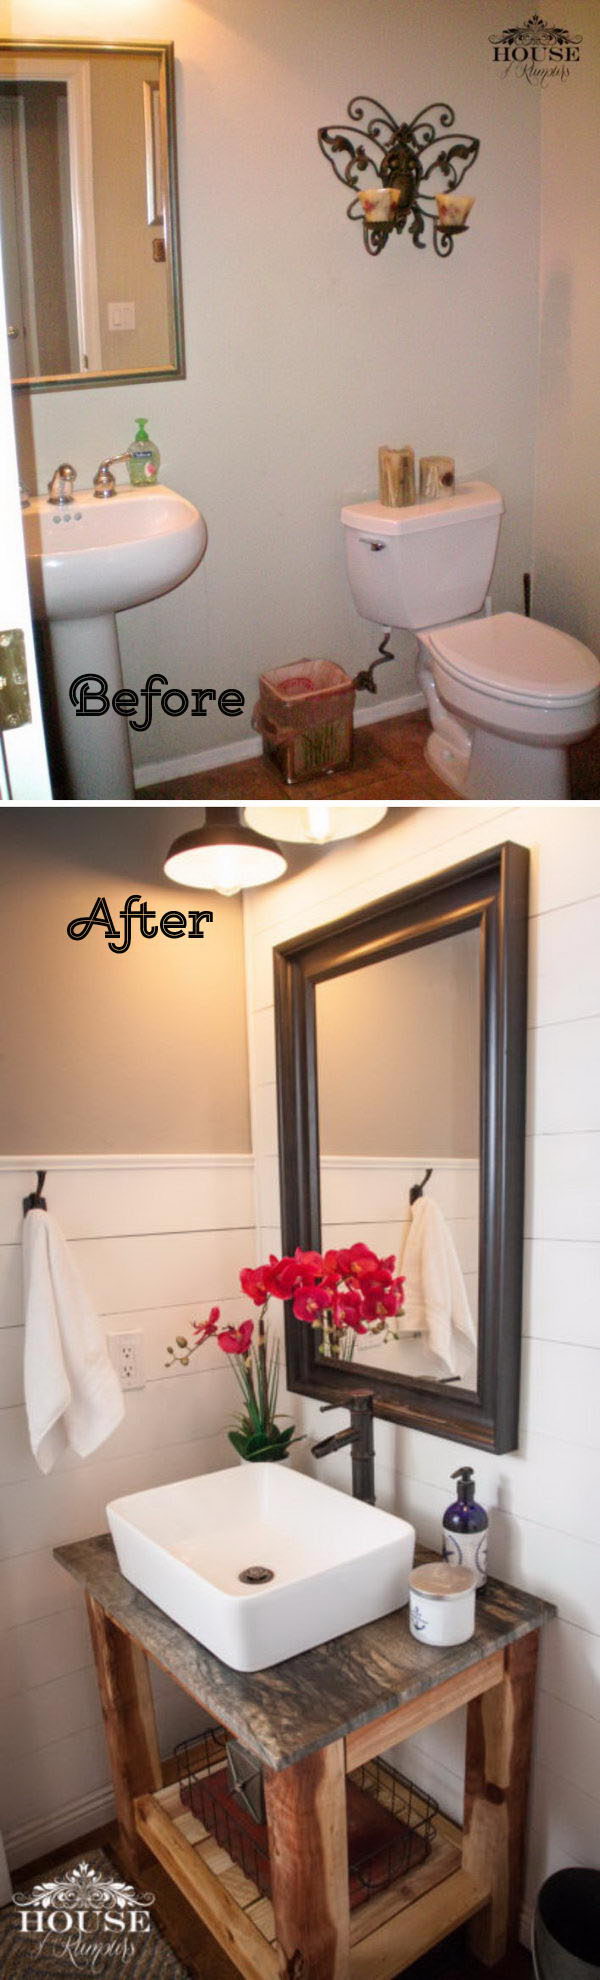 Powder Room Makeover With Shiplap Walls And A DIY Vanity. 